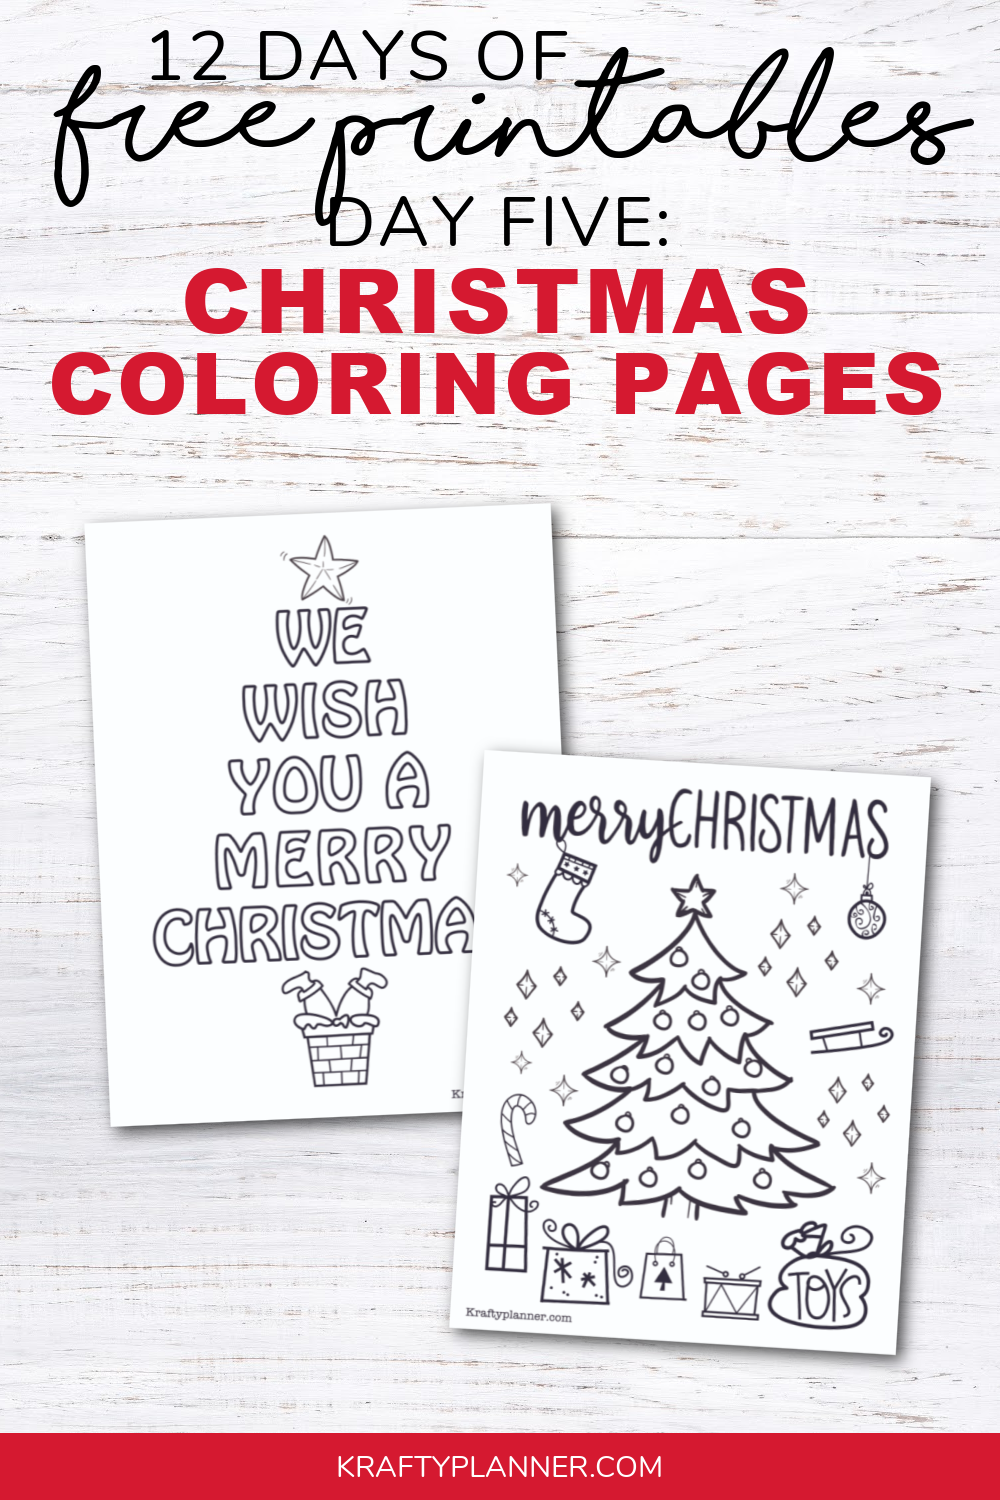 DAY 5: Christmas Coloring Pages